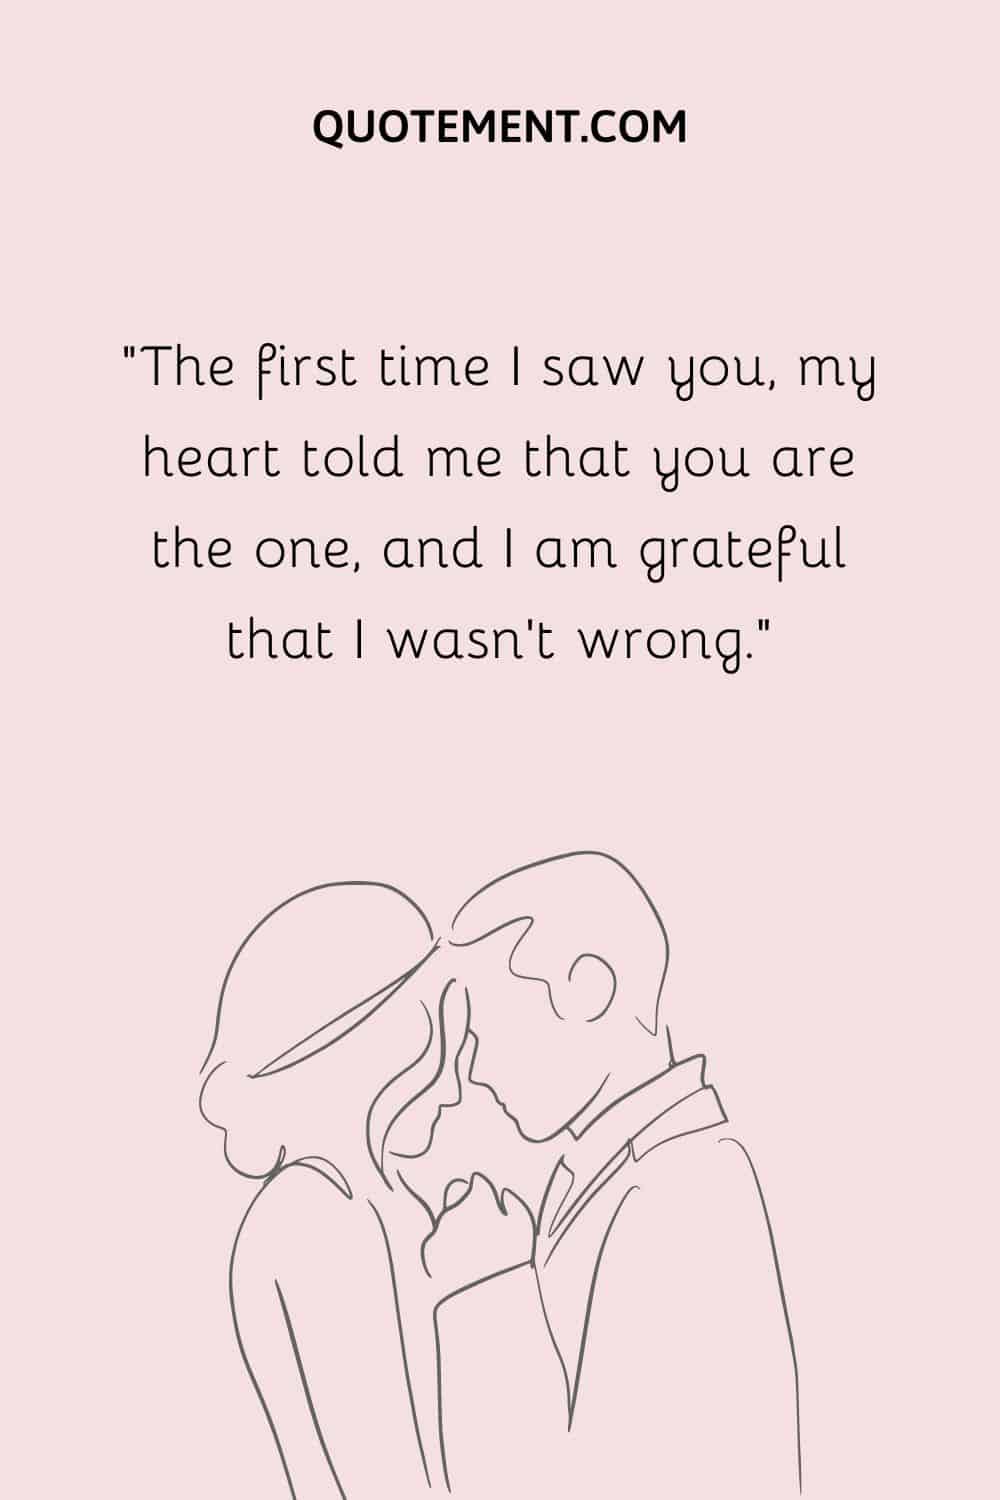 The first time I saw you, my heart told me that you are the one, and I am grateful that I wasn’t wrong